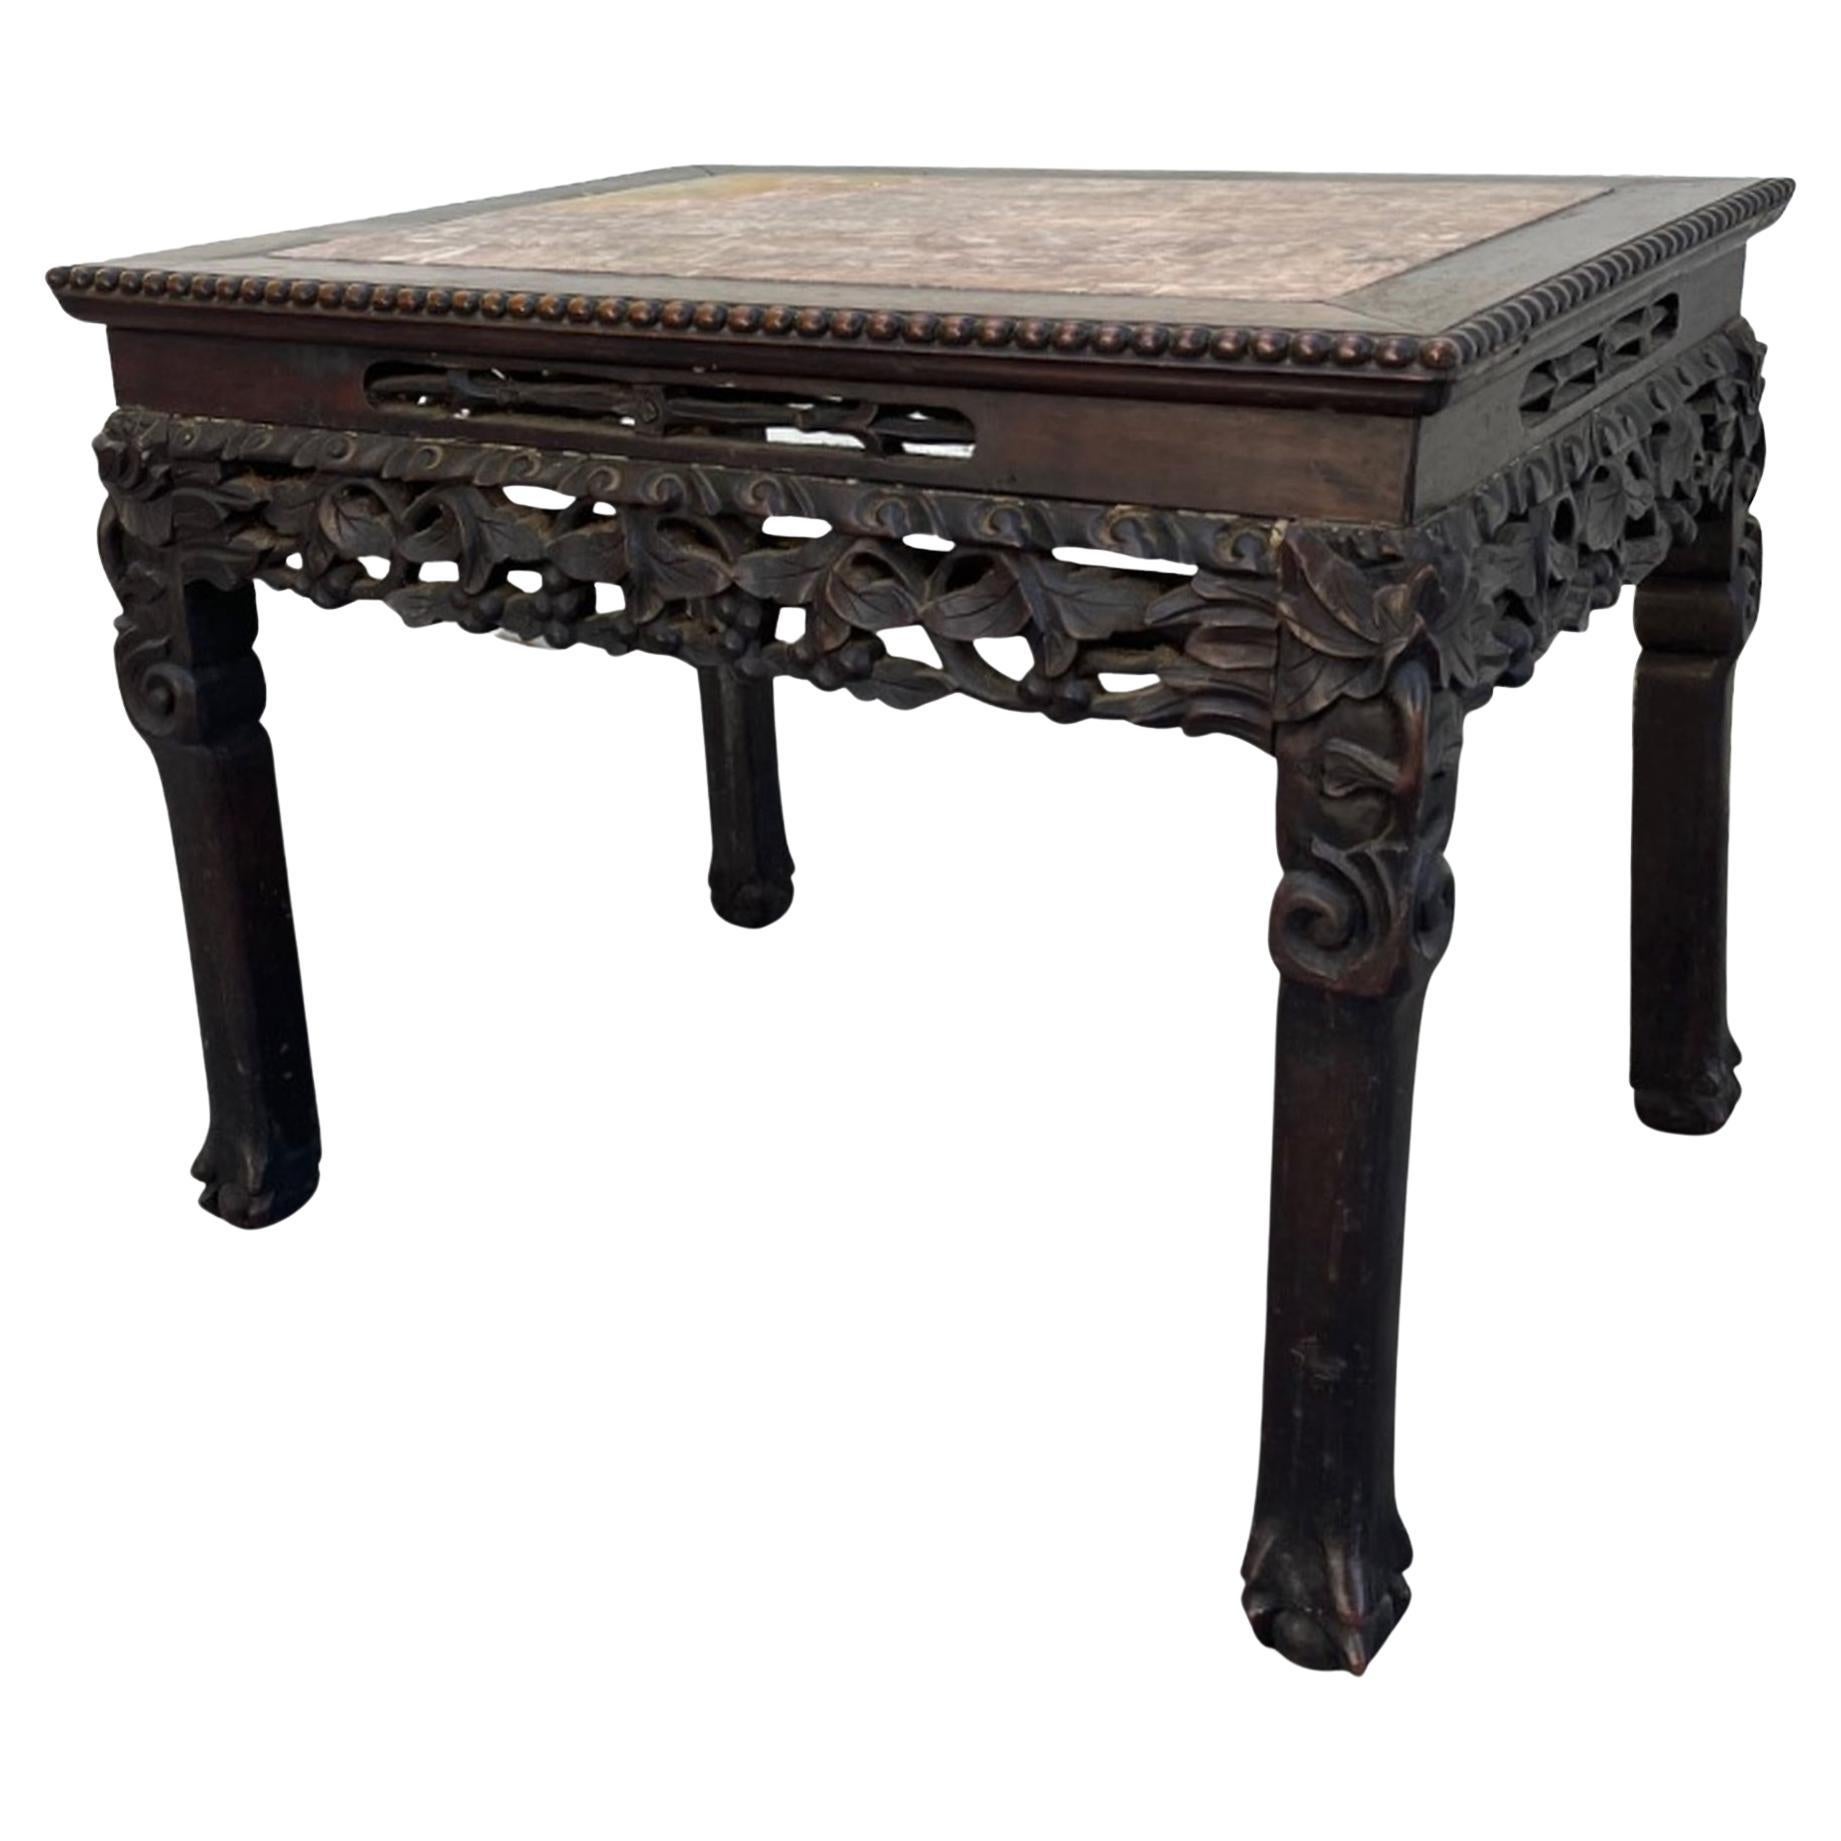 Chinese Hongmu Carved Side Table Qing Dynasty 19th century.

Rare 19th century hand carved Chinese Qing Dynasty Hongmu hardwood side table. The top of the table has a wonderful rouge marble insert. It is surrounded within a raised beaded border.